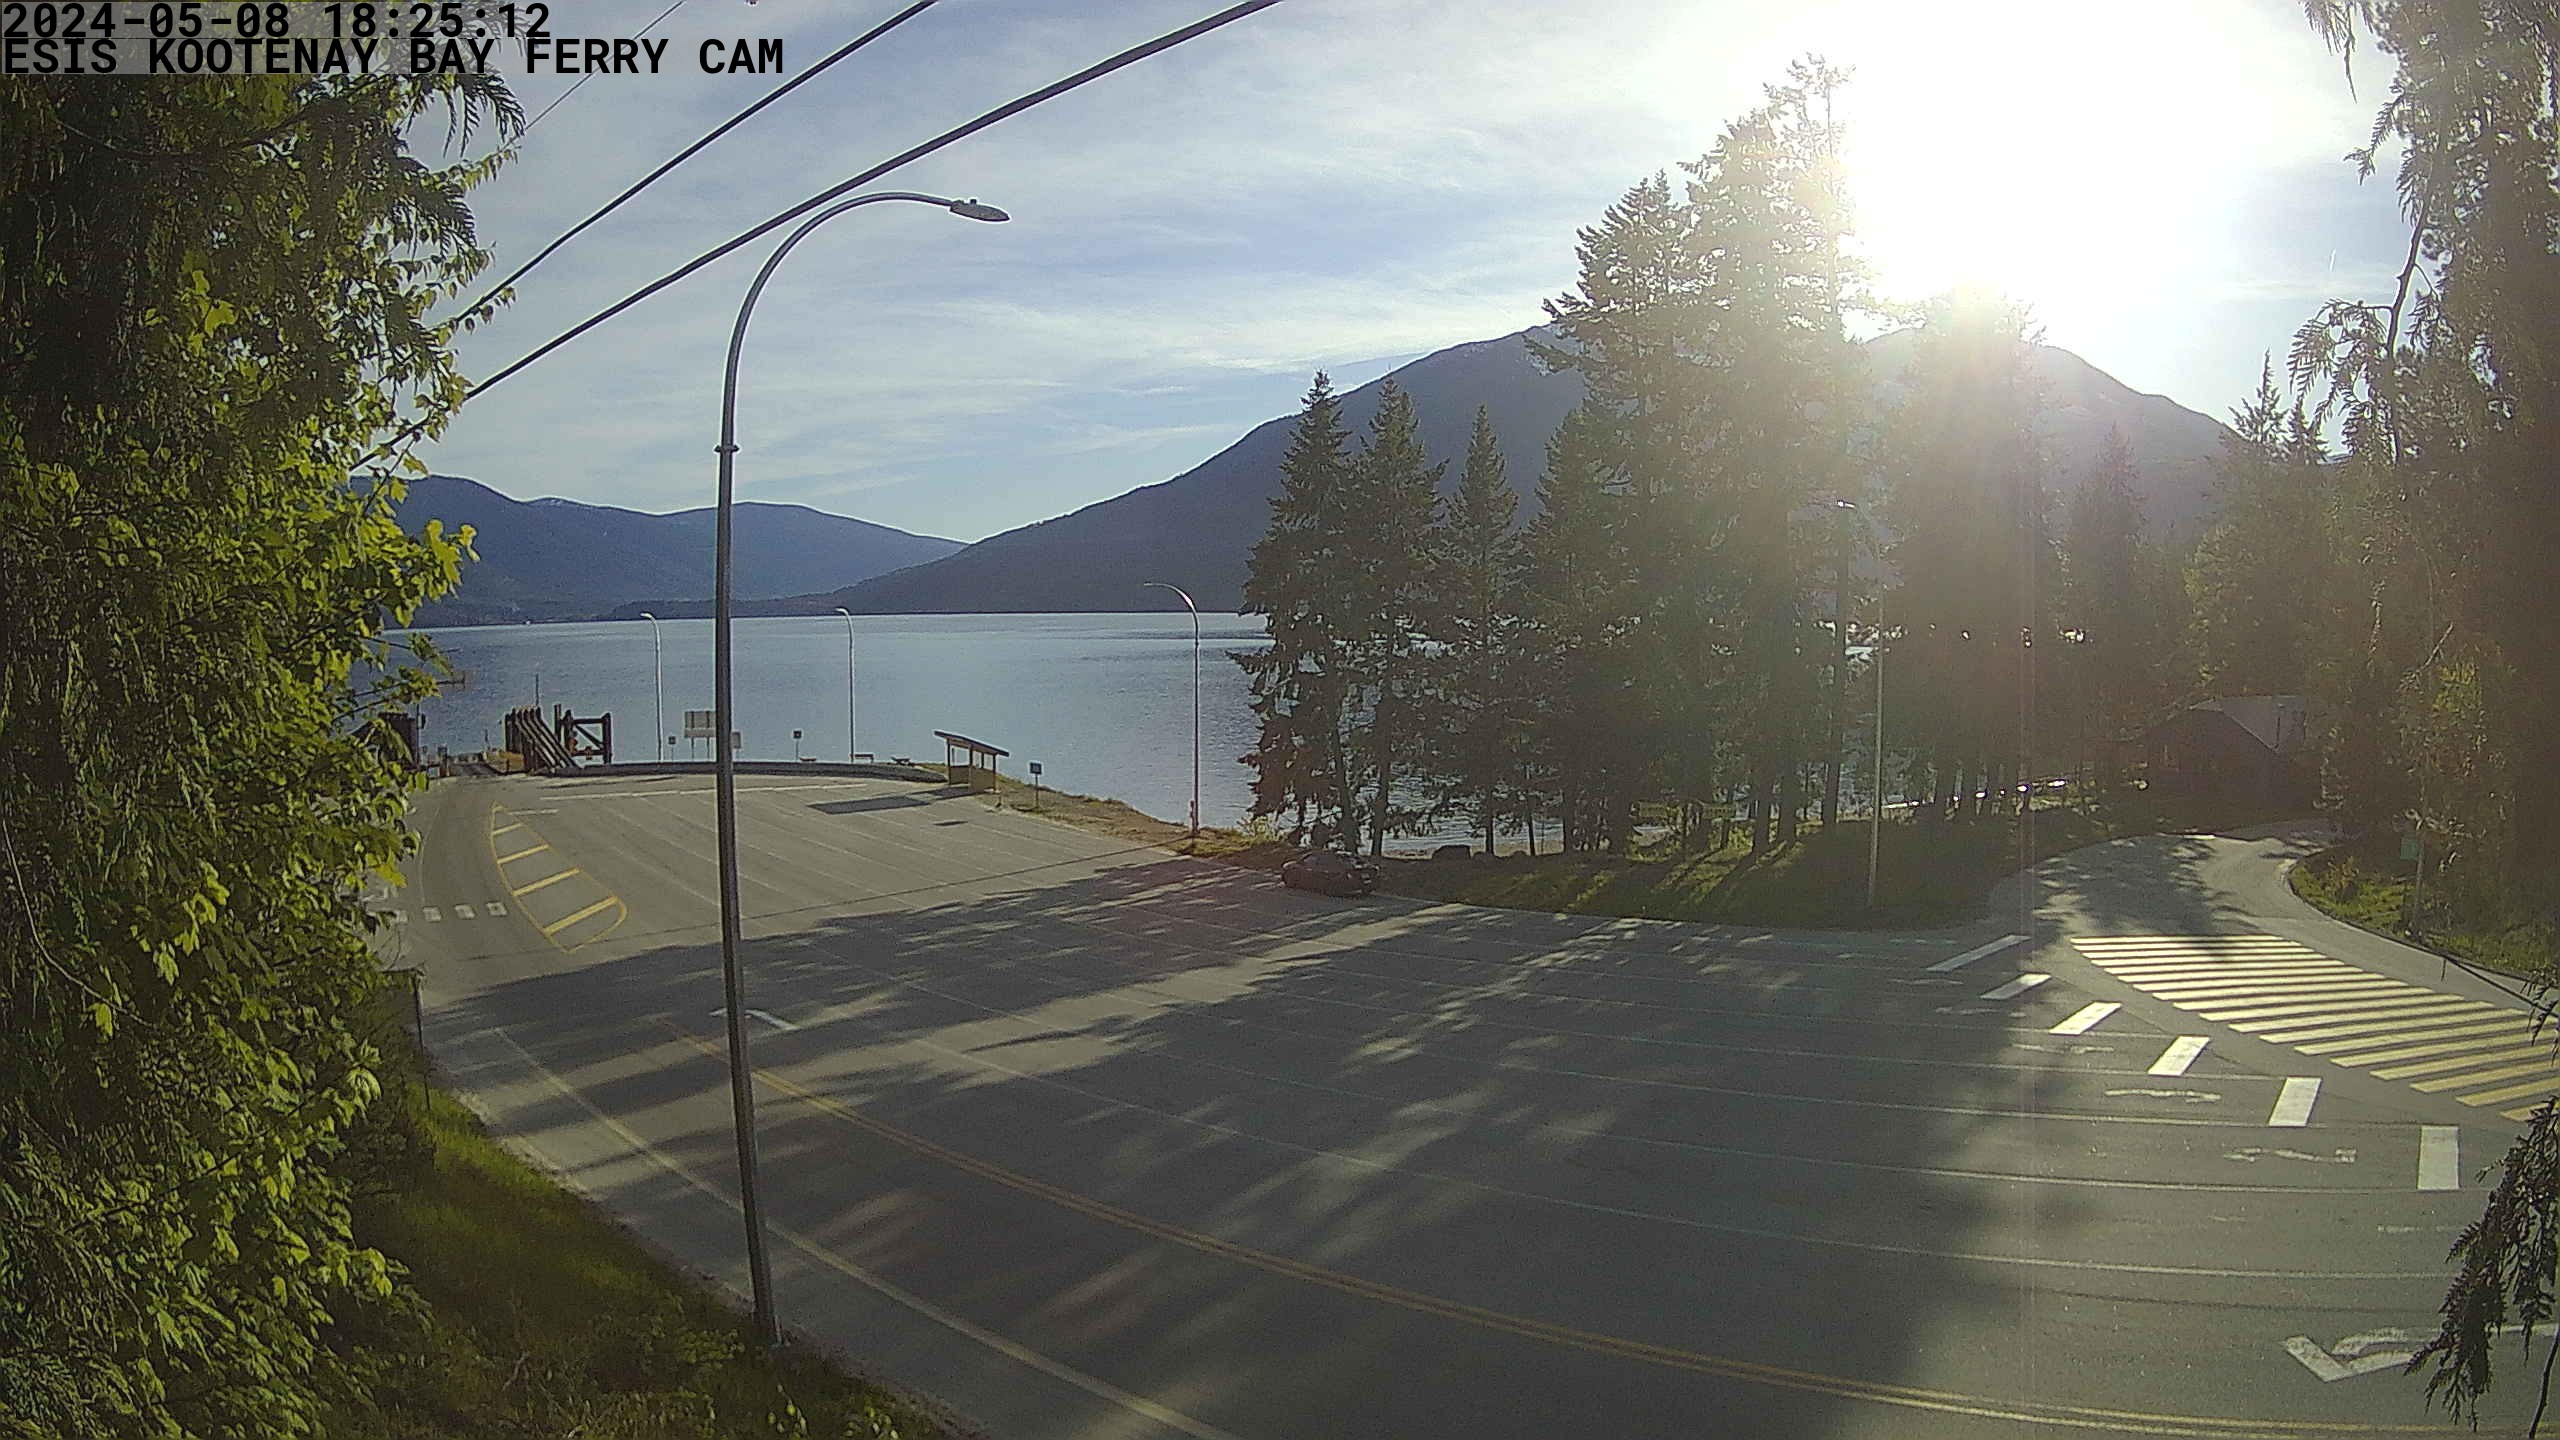 Kootenay Bay Ferry Landing Webcam - Provided by the East Shore Internet Society, with funding by the RDCK EDCK